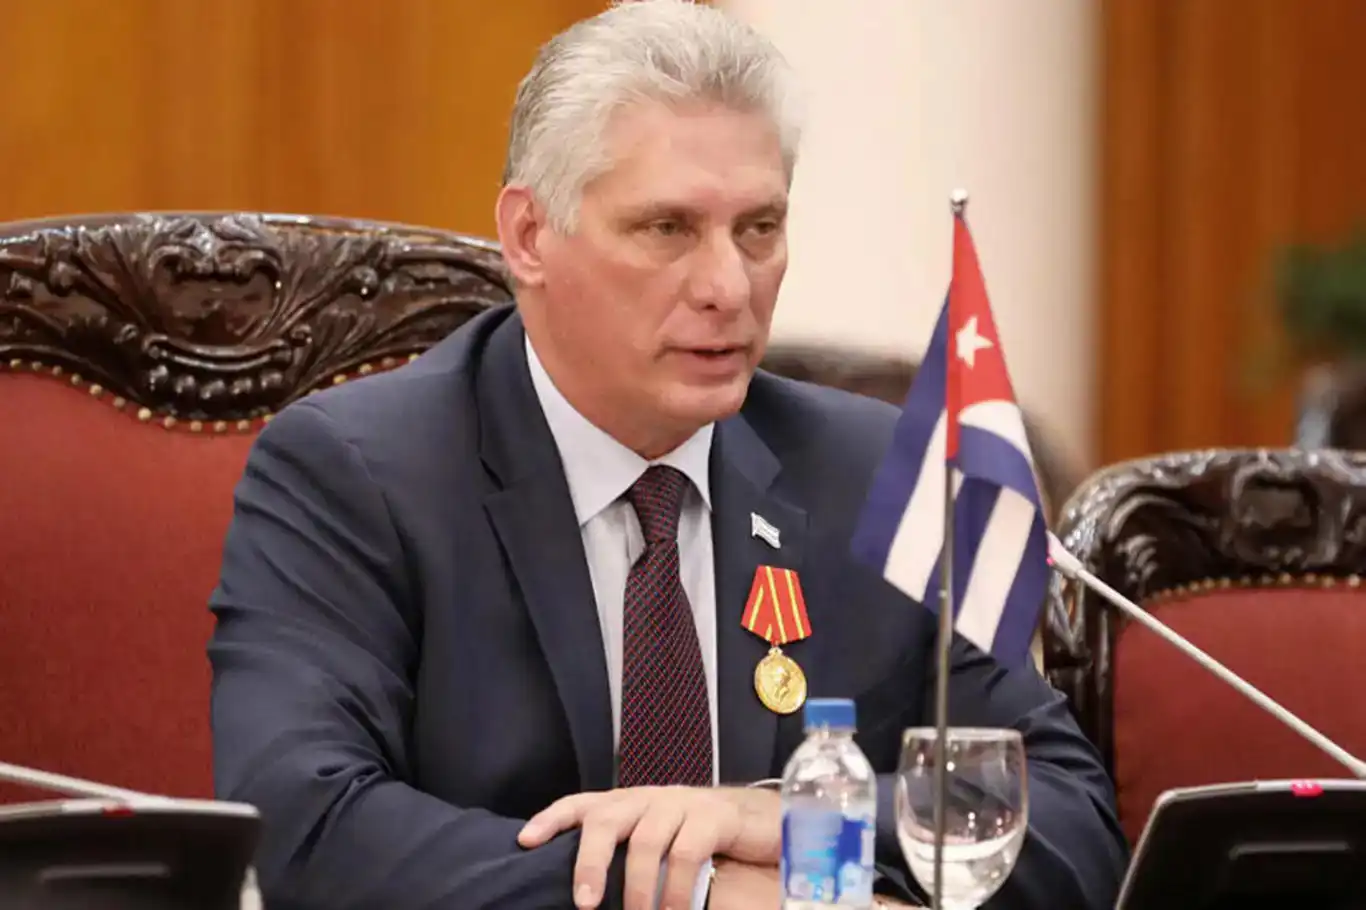 Cuba's President Diaz-Canel calls for end to Gaza genocide